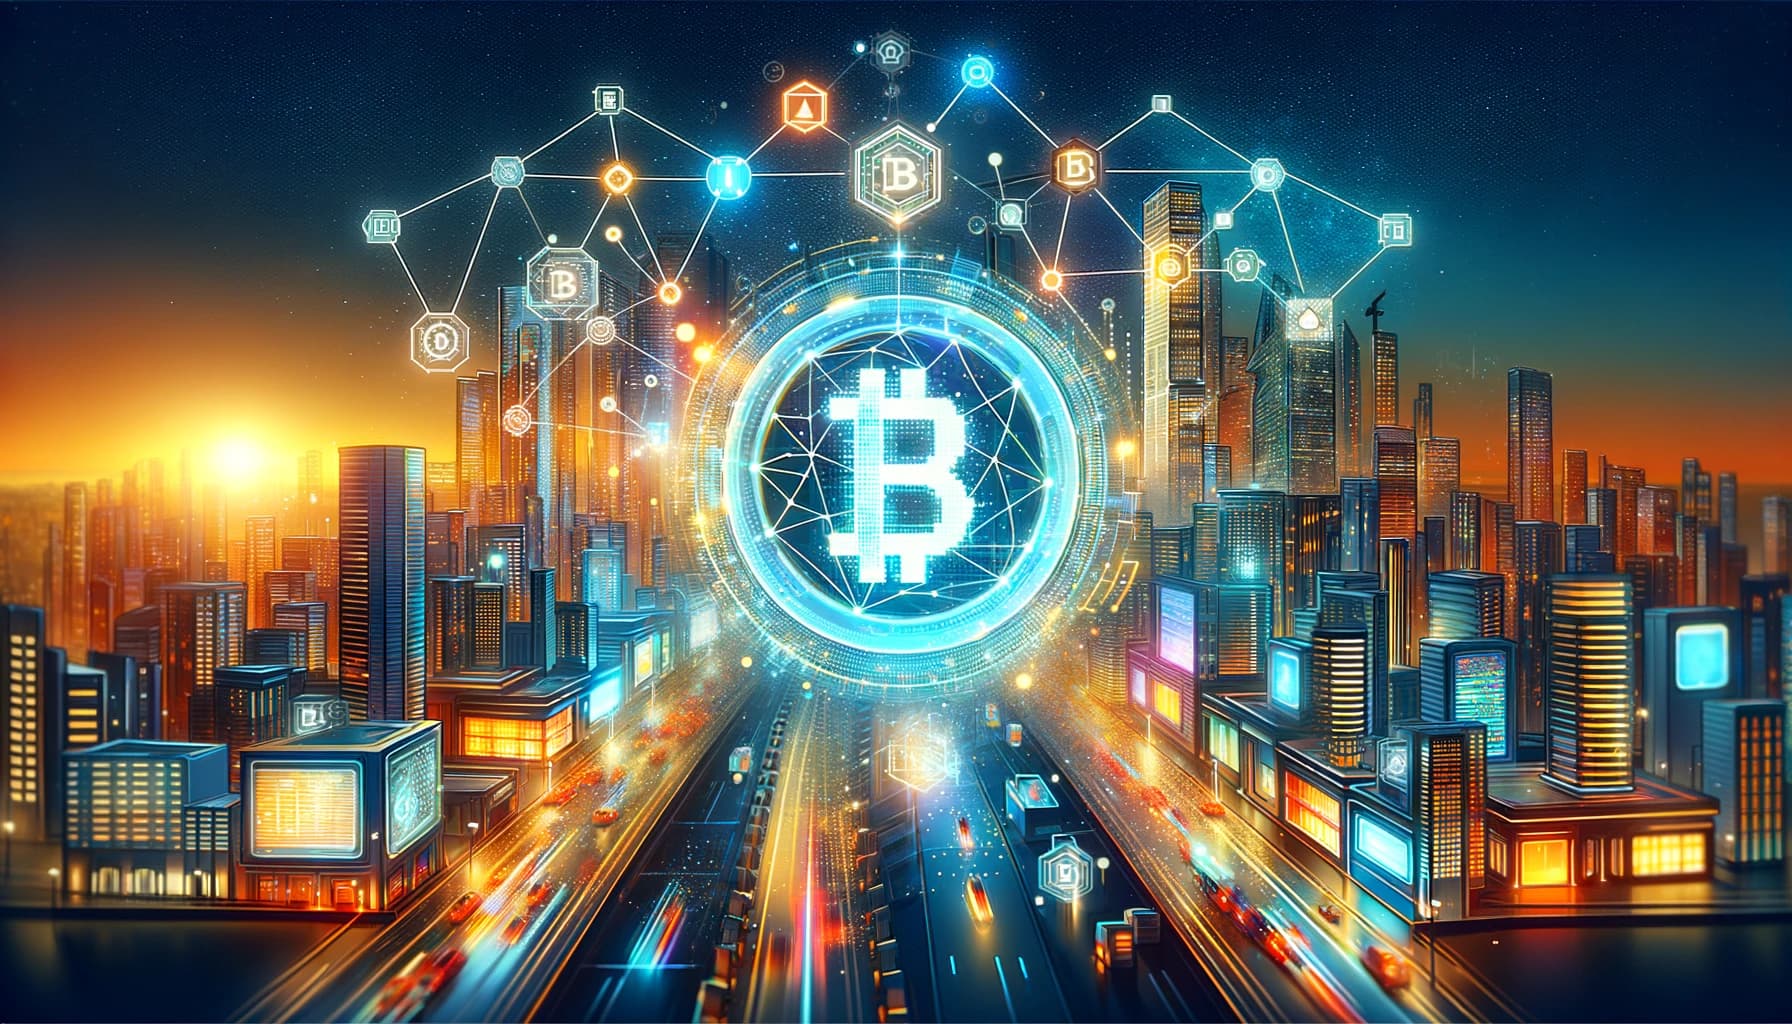 Bucket Technologies image showing a major highway running through the center of a downtown metropolitan area with a large Bitcoin logo floating in the sky above as well as many different blockchain icons also floating in the night time sky.